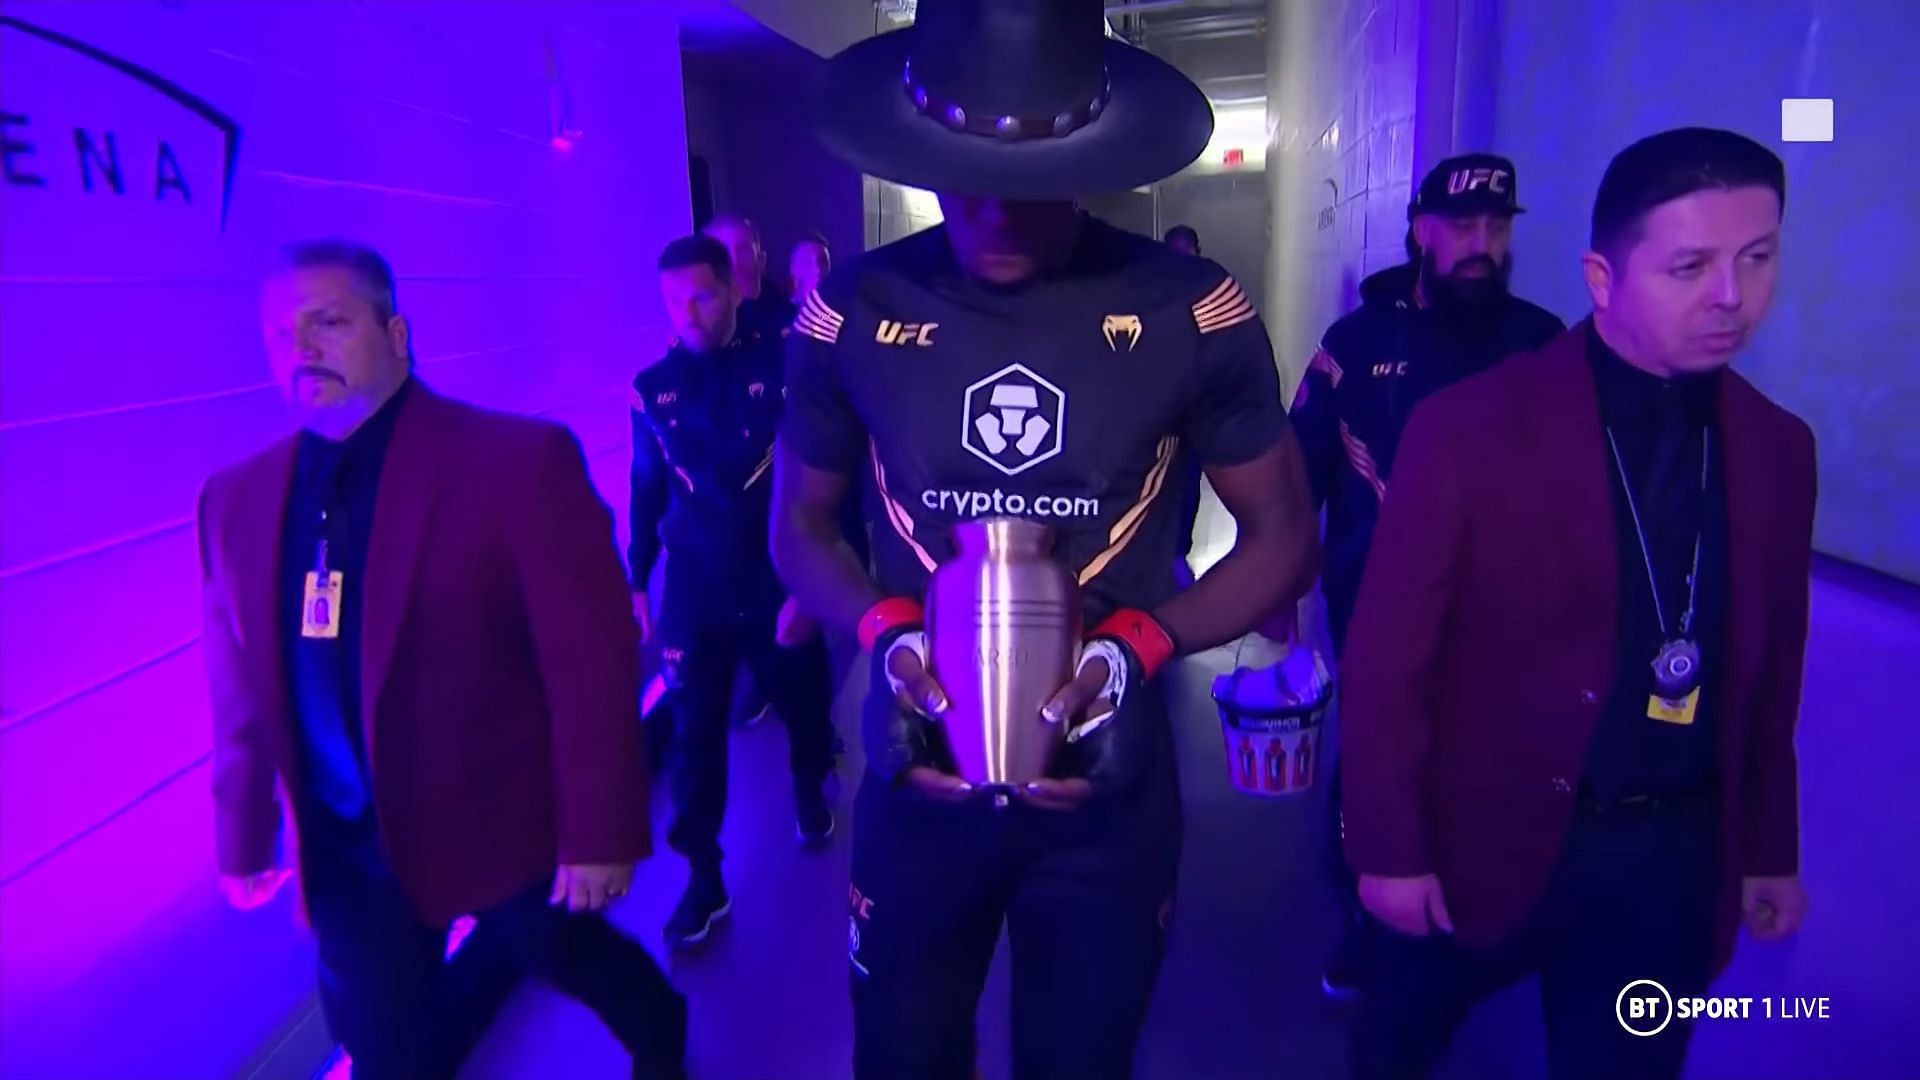 Israel Adesanya comes out dressed as The Undertaker at UFC 276